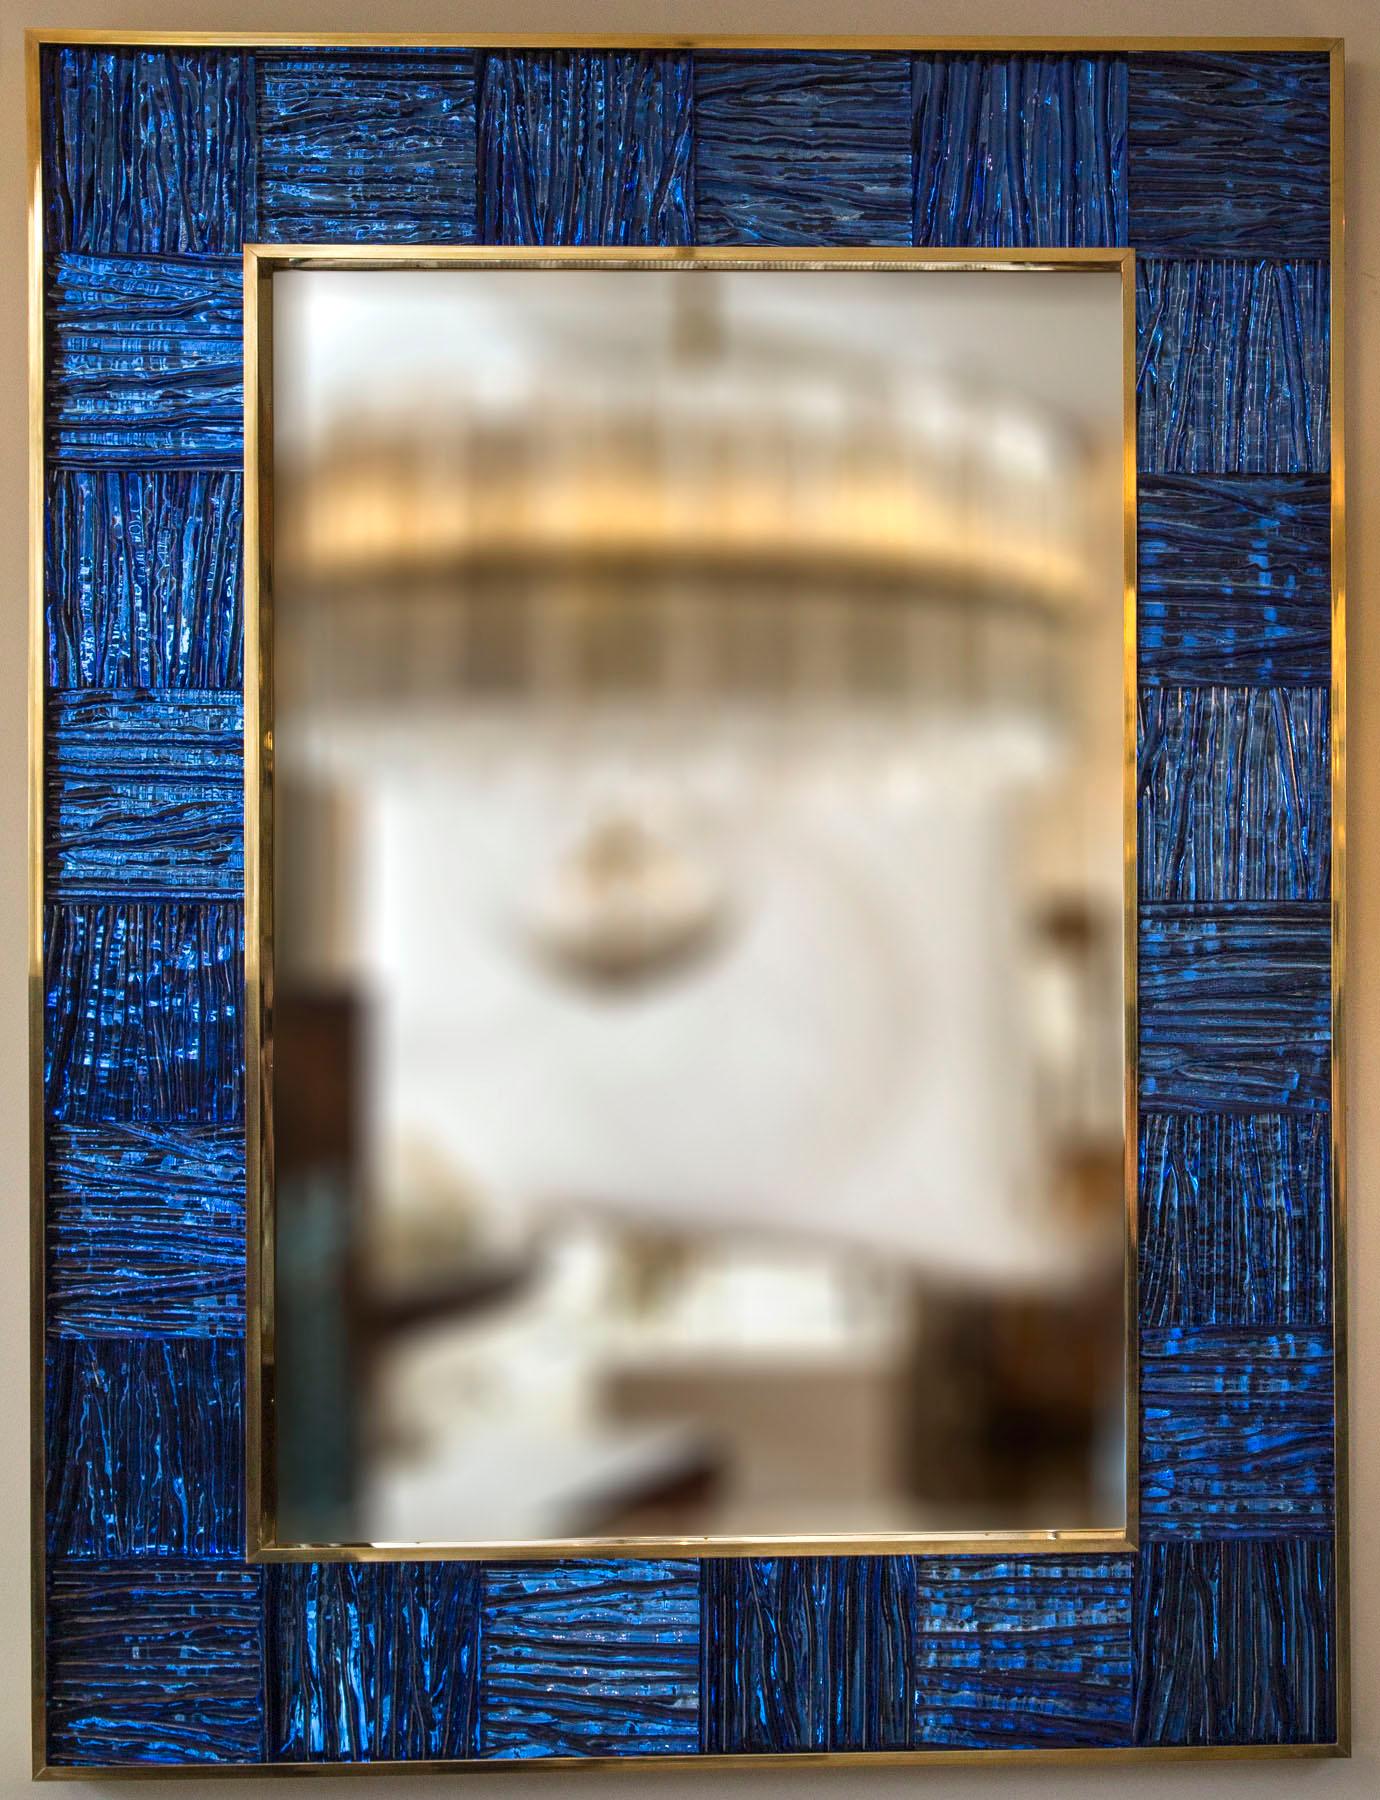 Striking un-lacquered brass framed mirror inset with thickly blown wavy textured glass panels in a beautiful blue tone, artisan metal and glass work. Weight 70-75 lbs
1 available or customize-able in size and color
Date: contemporary
Origin: